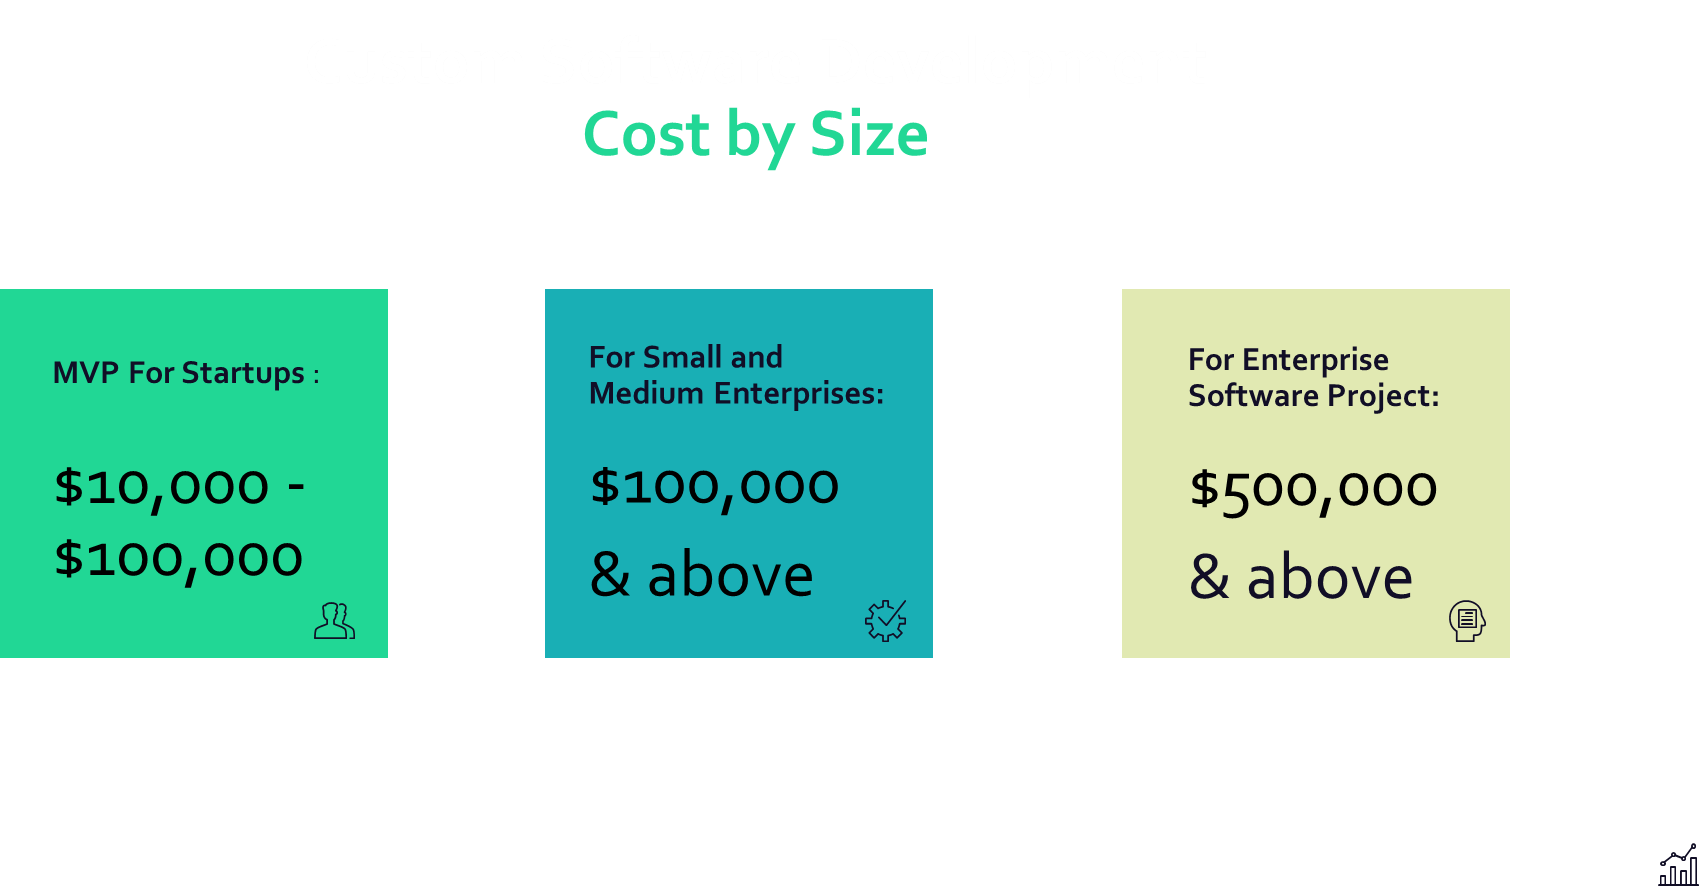 Image showing Custom Software Development Costs by sizes